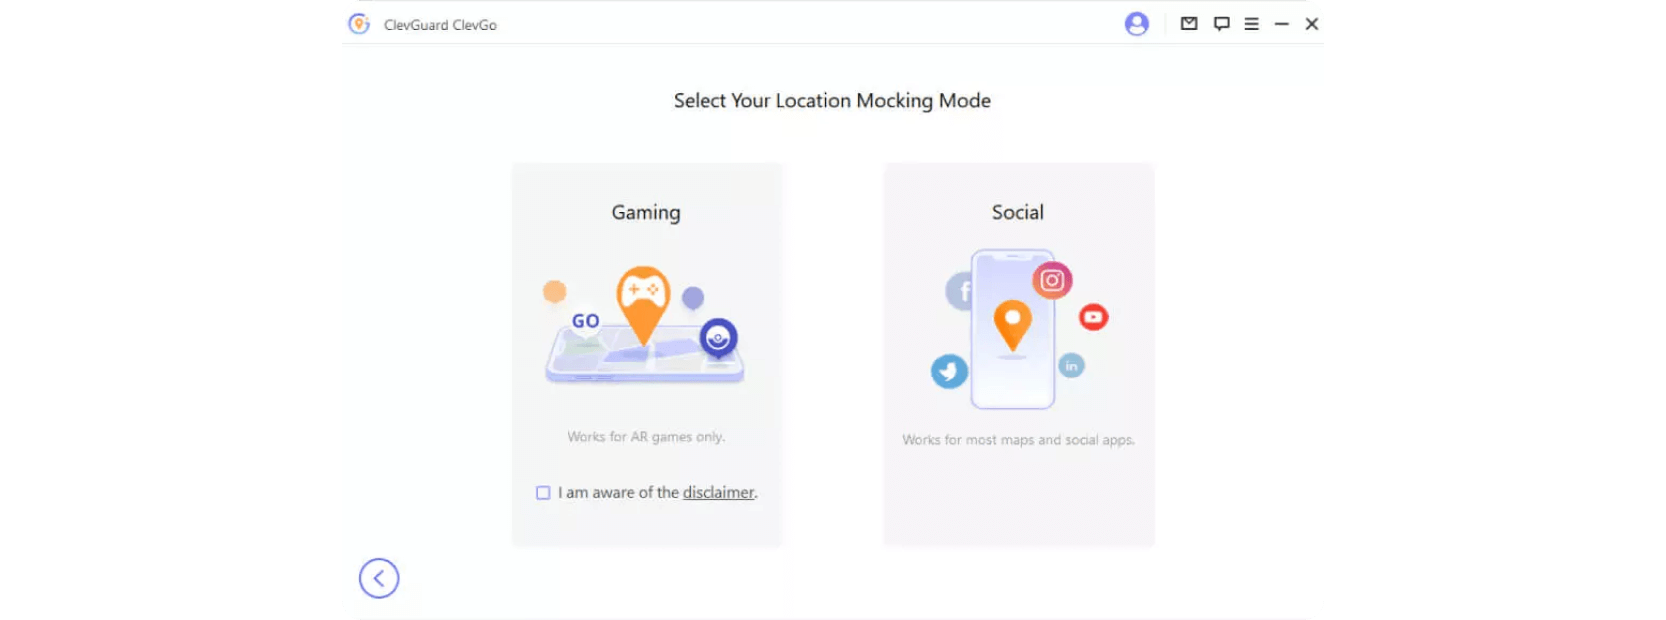 How to choose location mode in clevgo